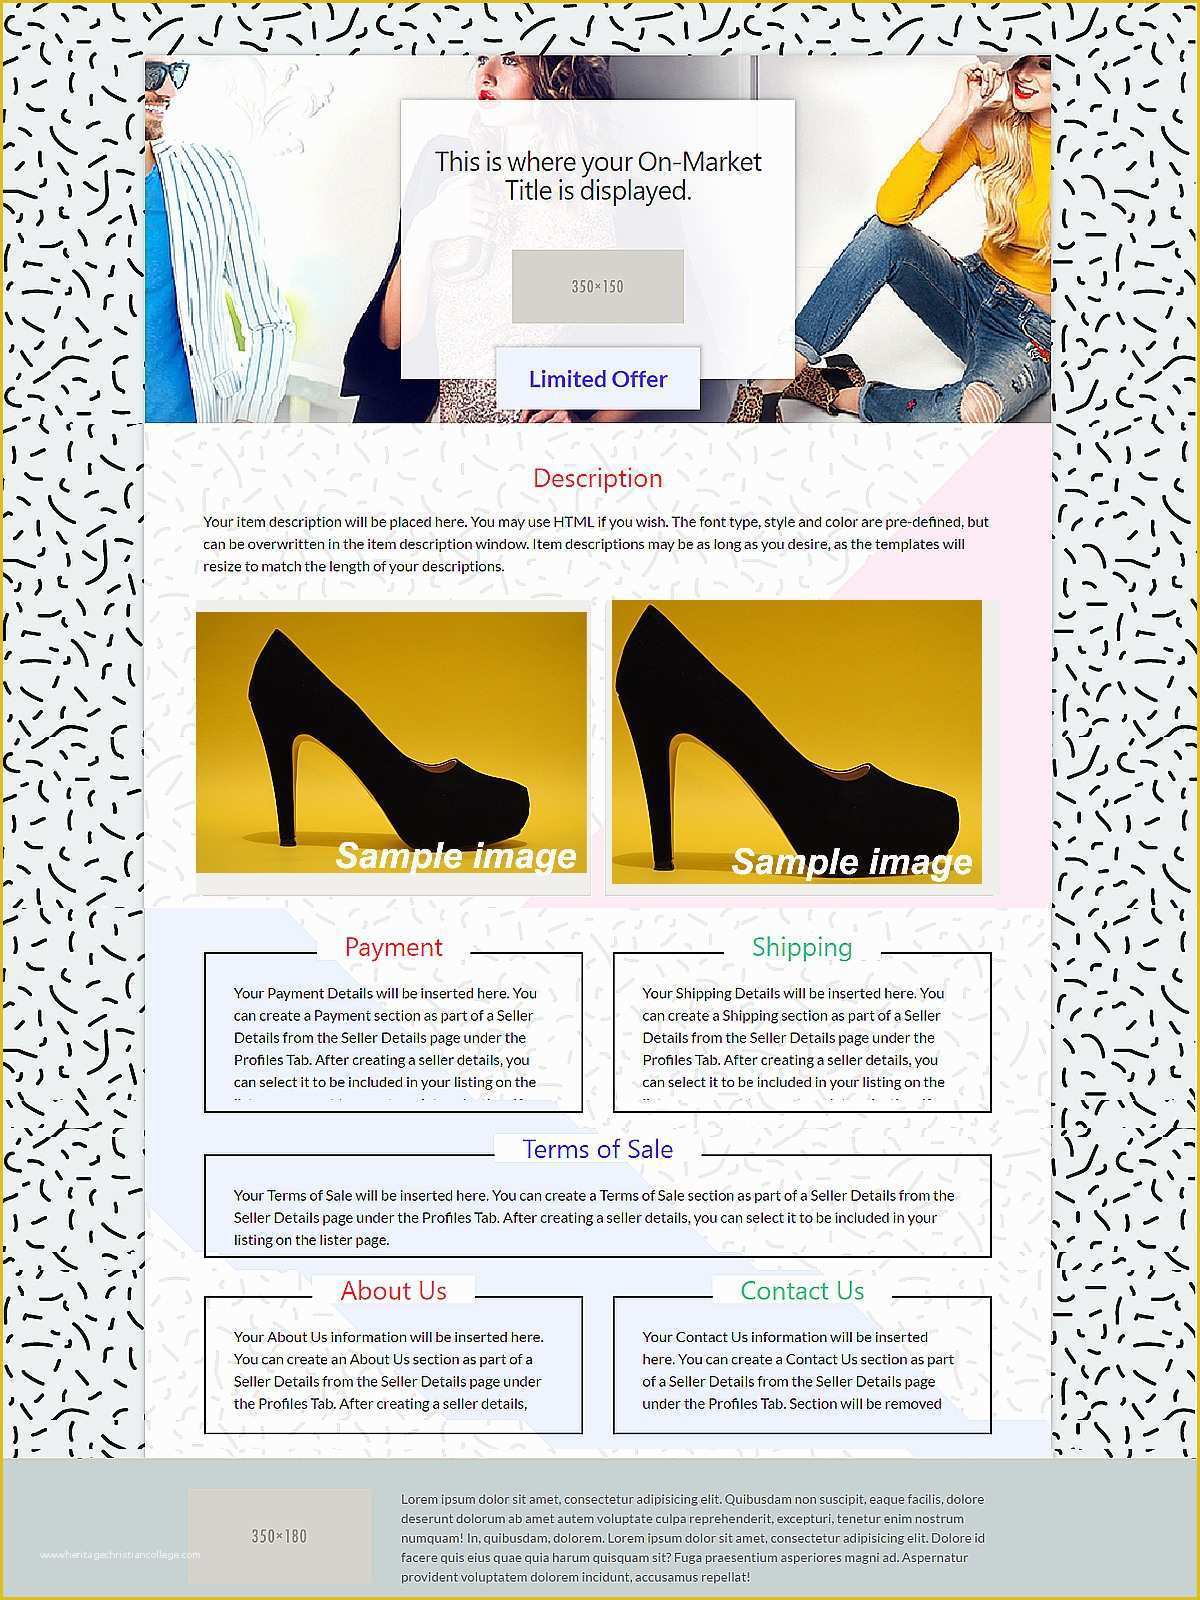 Ebay Selling Templates Free Of Selling On Ebay Vendio Marketplaces Help You Sell On Ebay